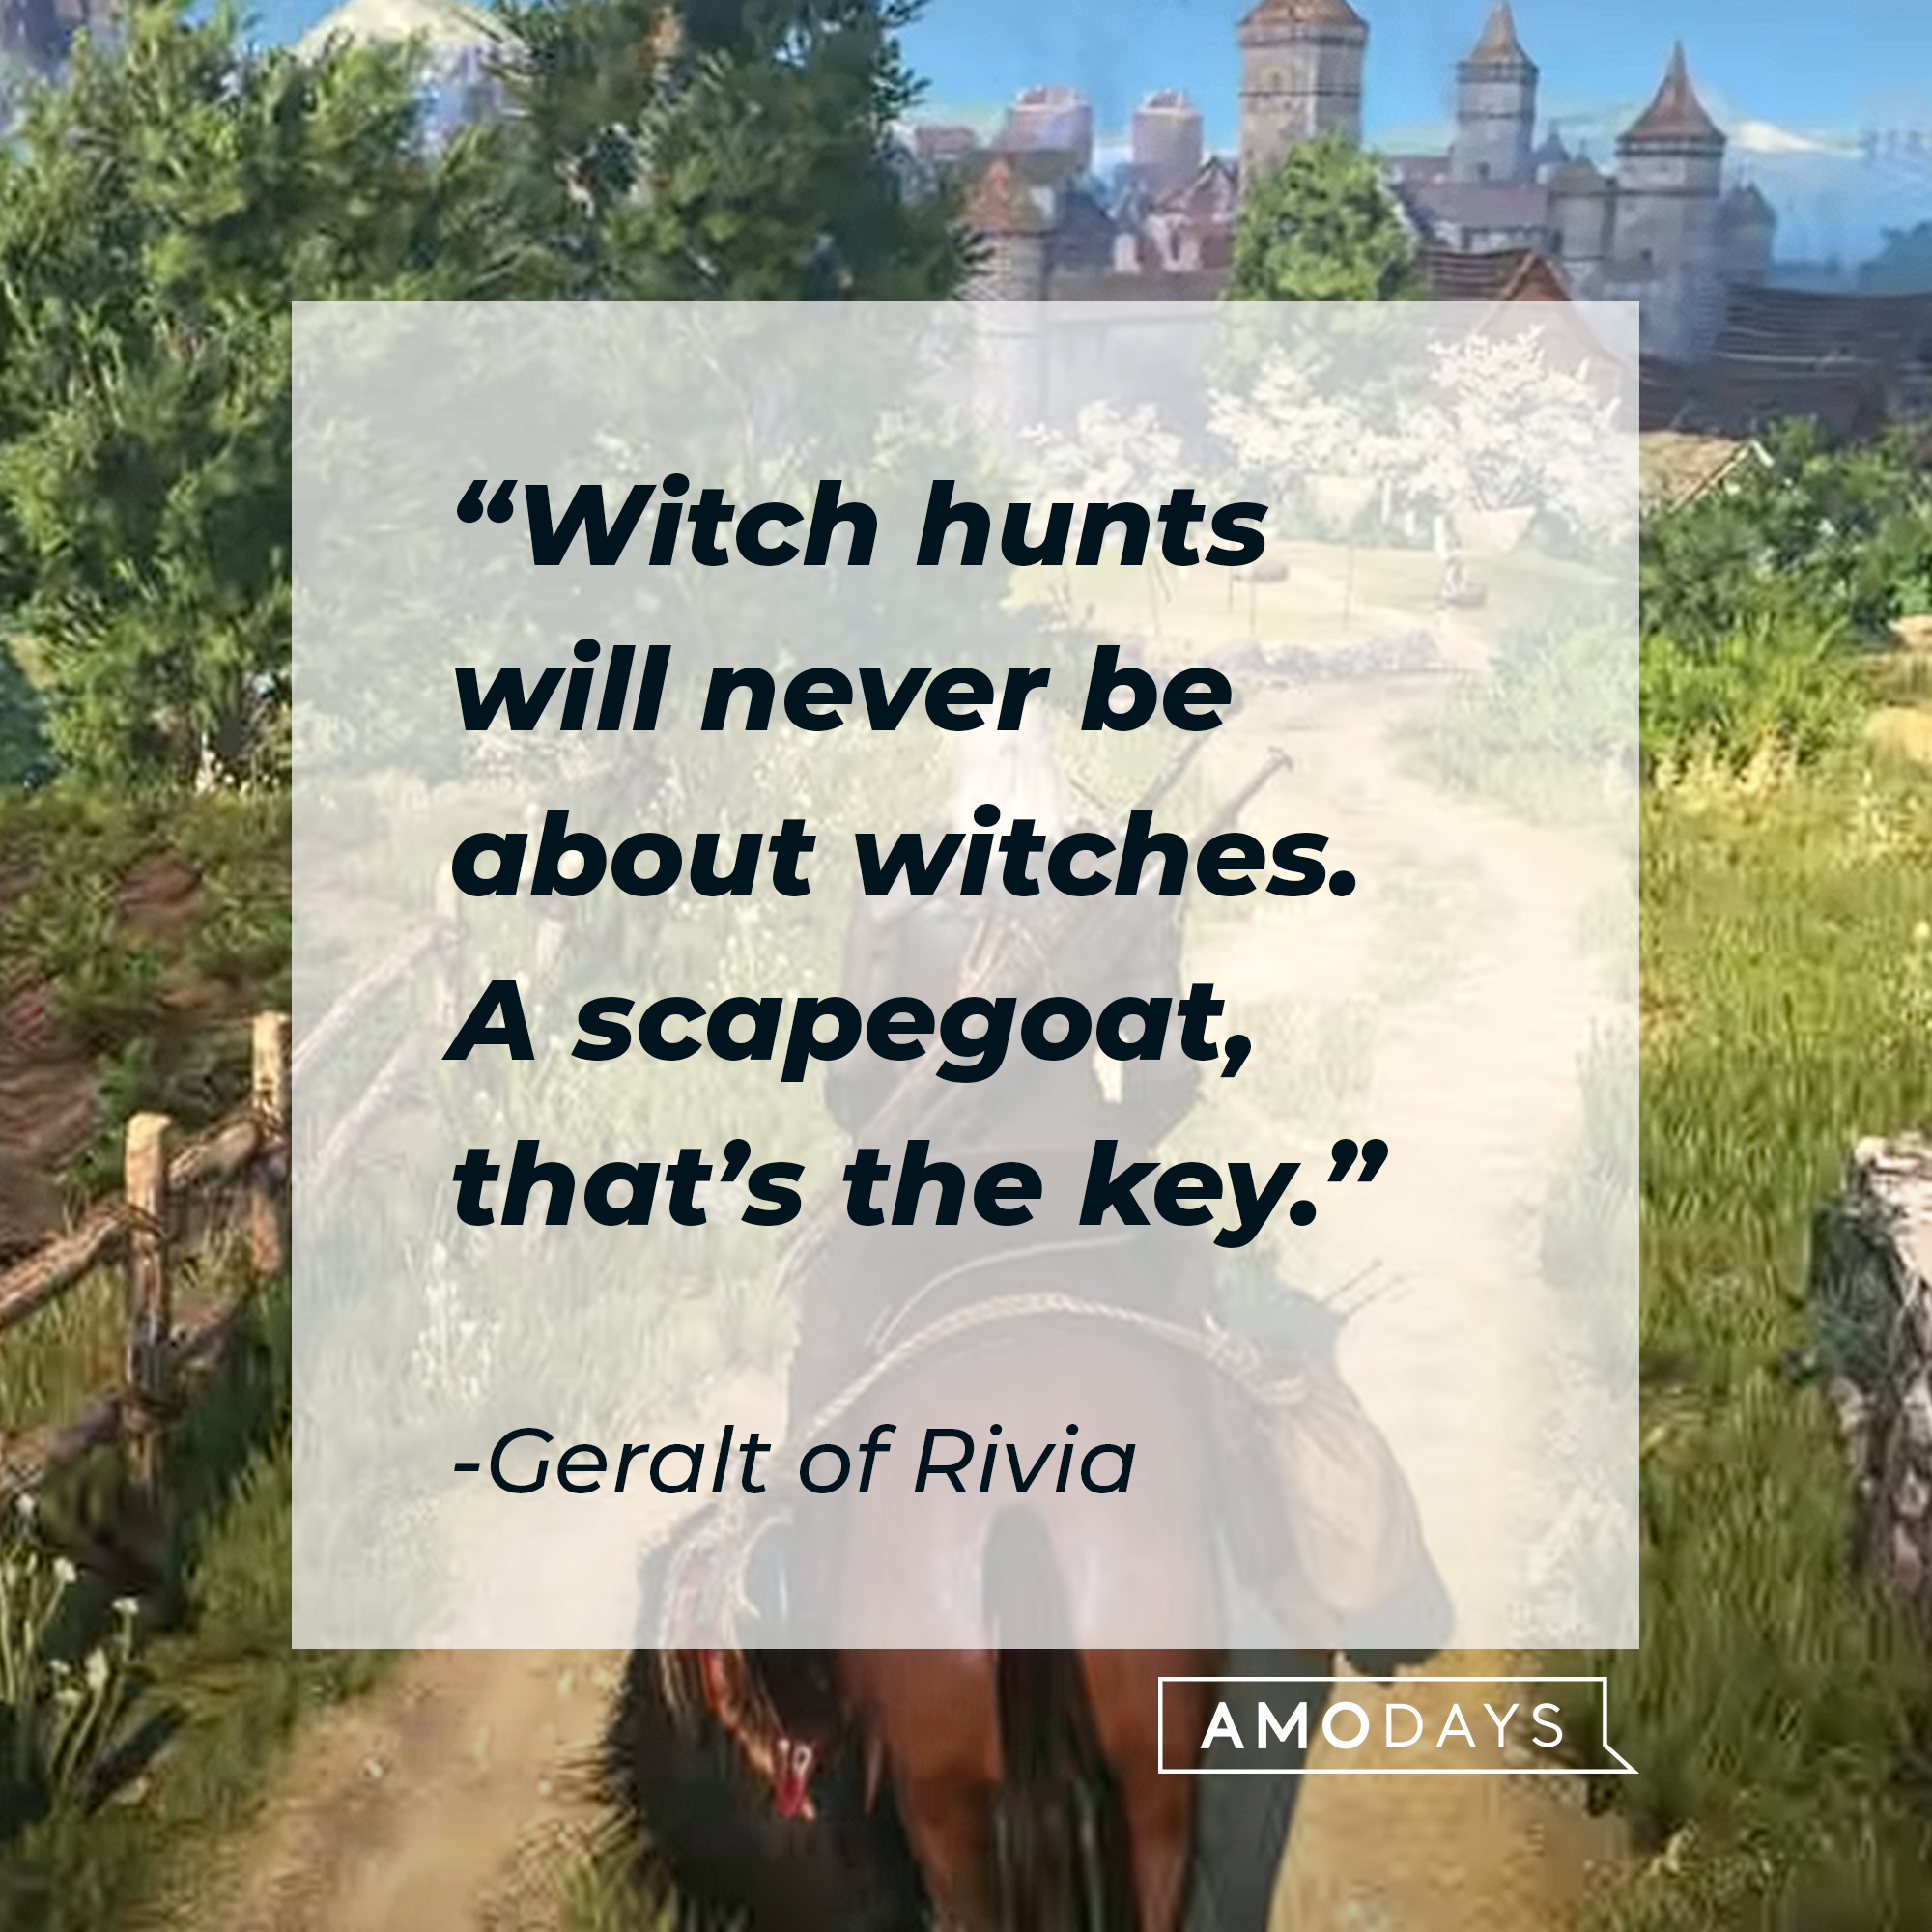 Geralt of Rivia from the video game with his quote: "Witch hunts will never be about witches. A scapegoat, that’s the key.” | Source: youtube.com/thewitche